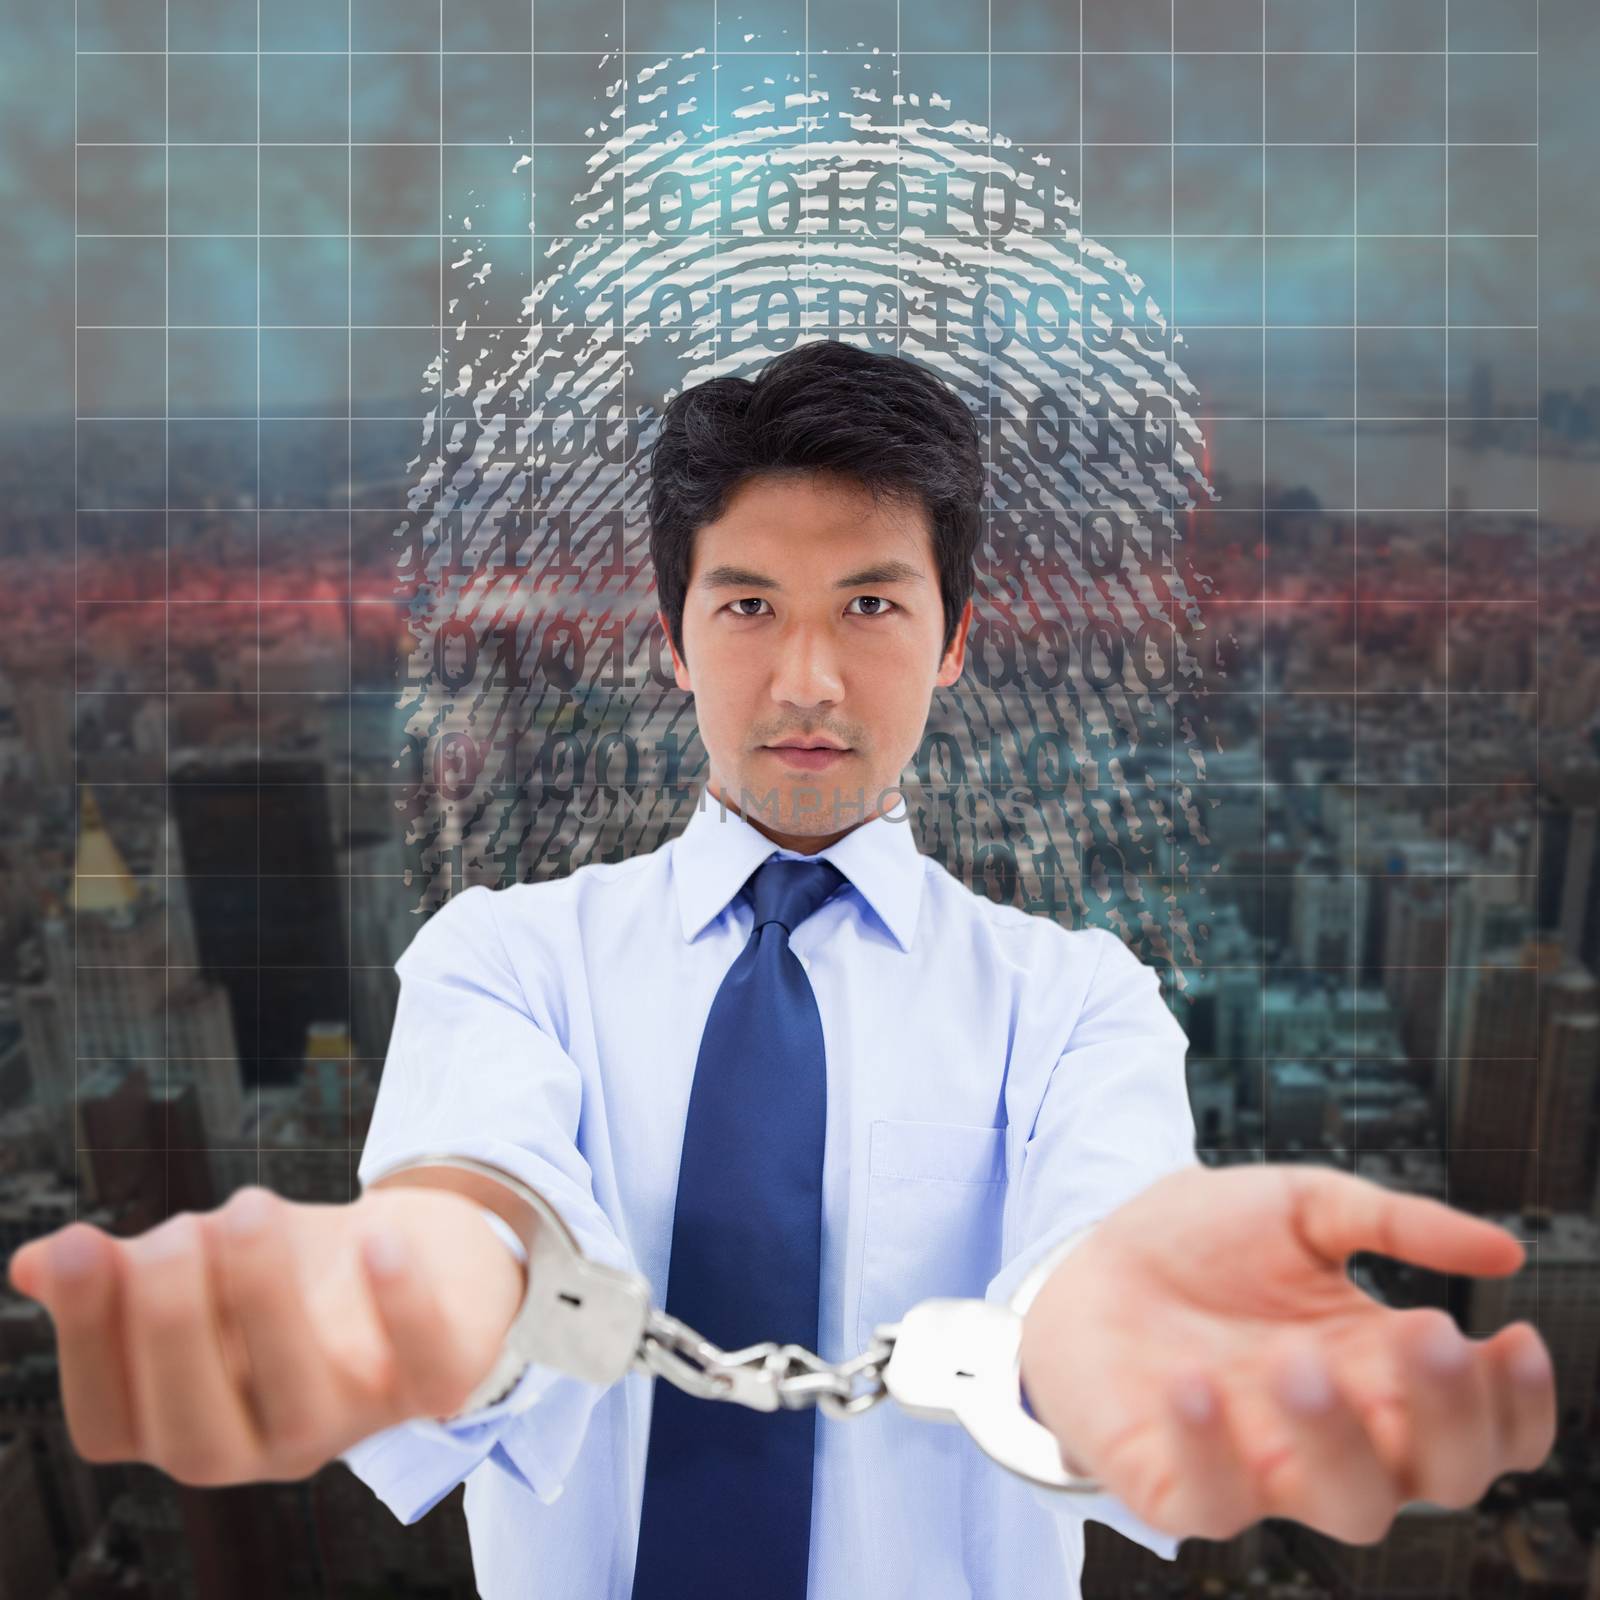 Composite image of businessman with handcuffs by Wavebreakmedia